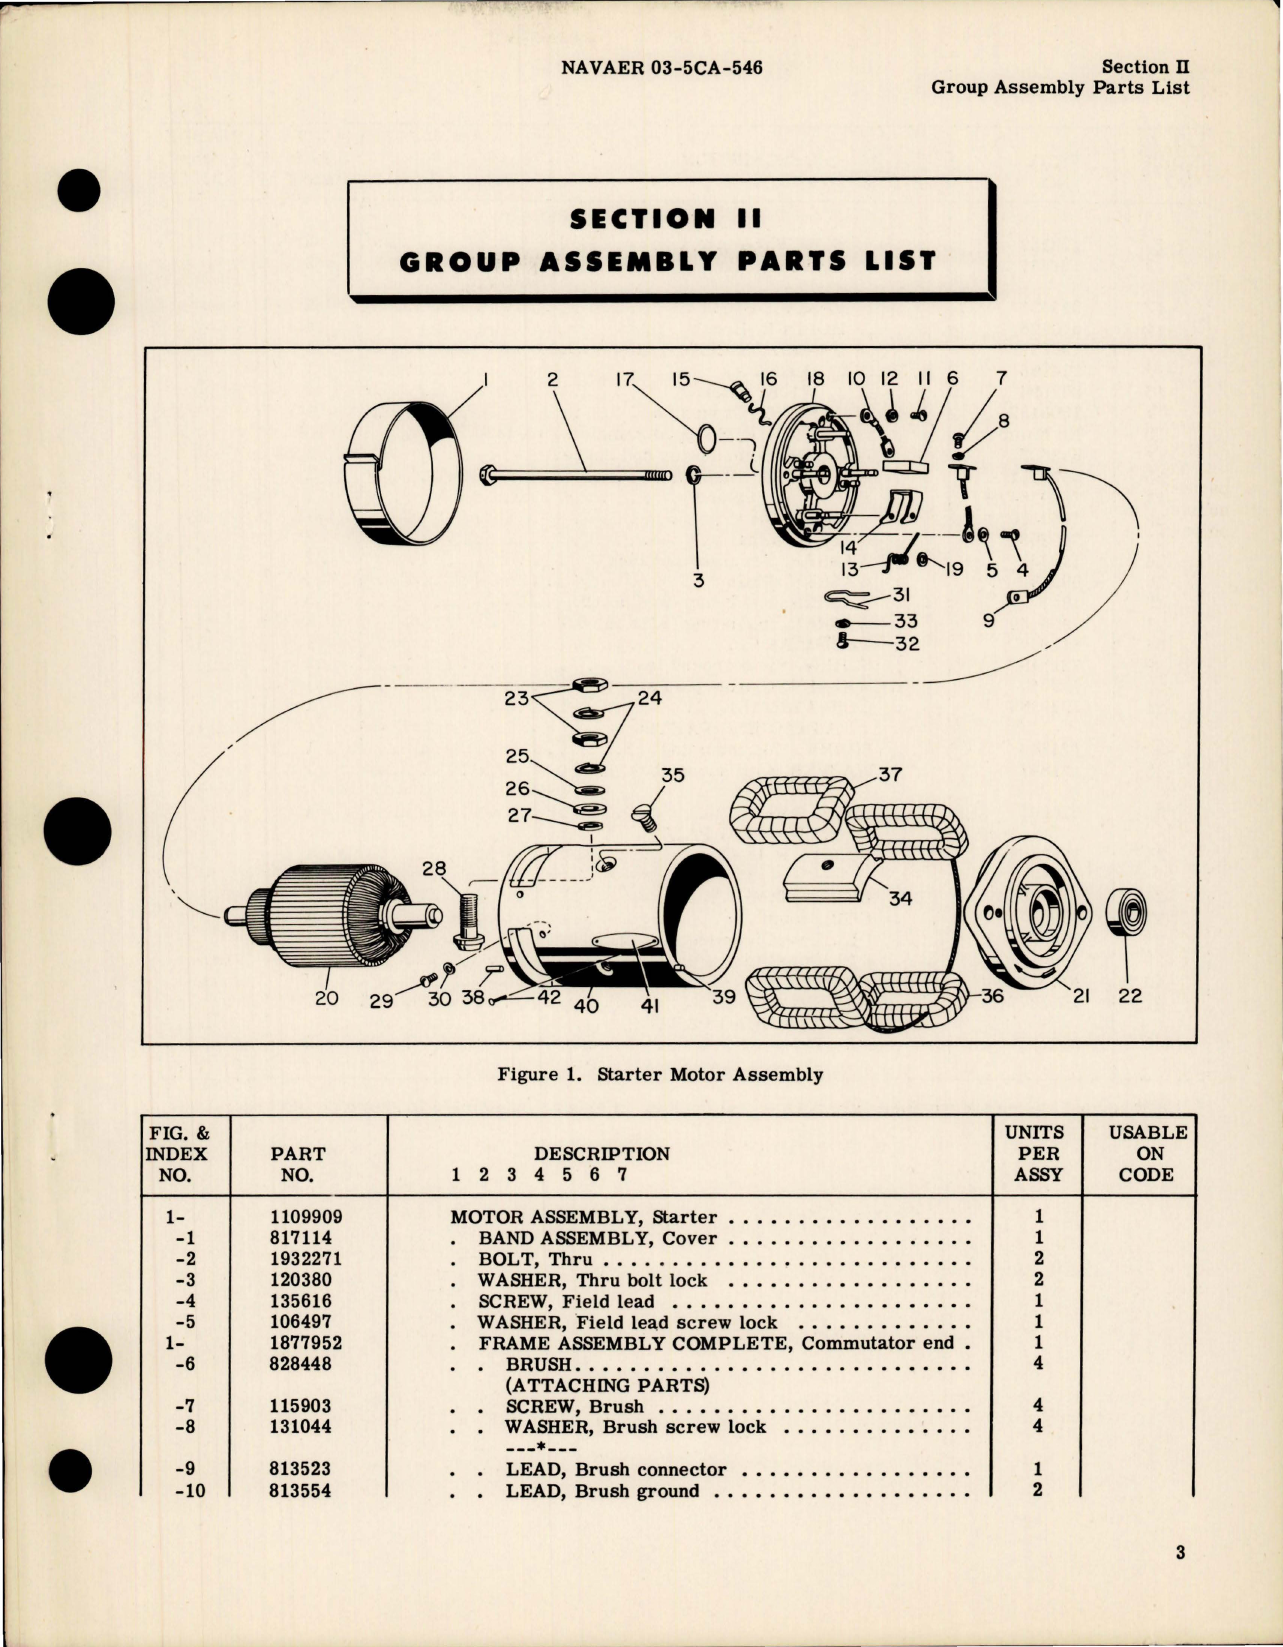 Sample page 5 from AirCorps Library document: Illustrated Parts Breakdown for Starting Motor Assembly - Part 1109909 